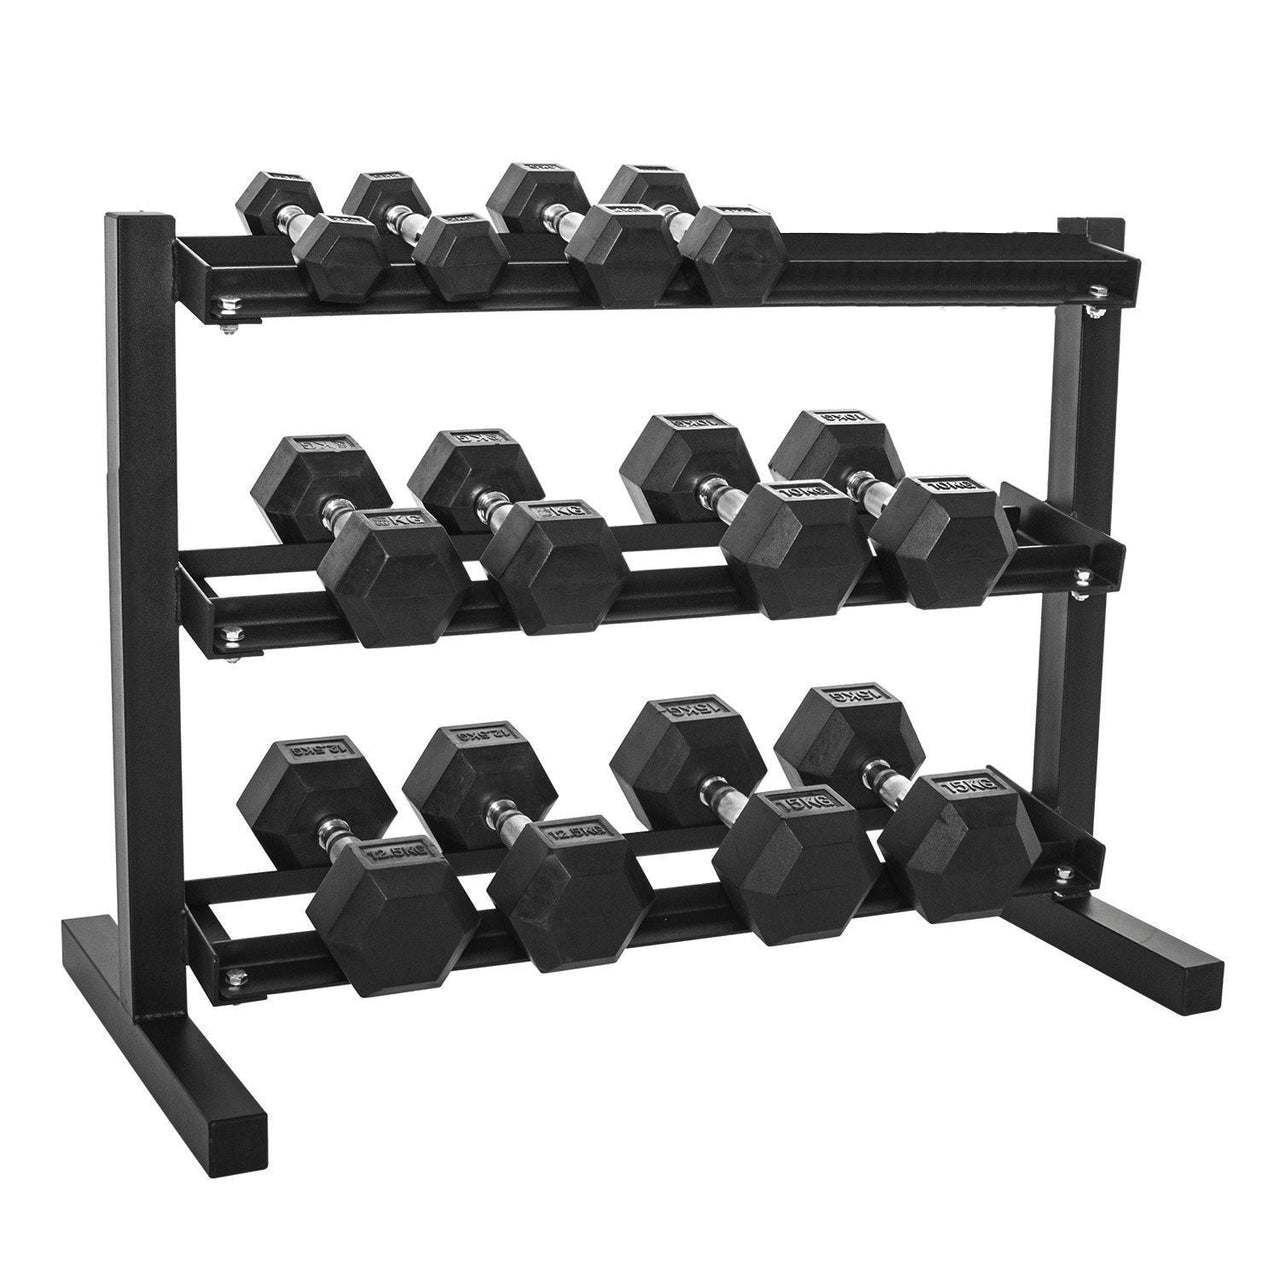 Combo Offer - Hex Dumbbell Set 2.5 Kg to 15 Kg with Dumbbell Rack + Flat Bench A0011